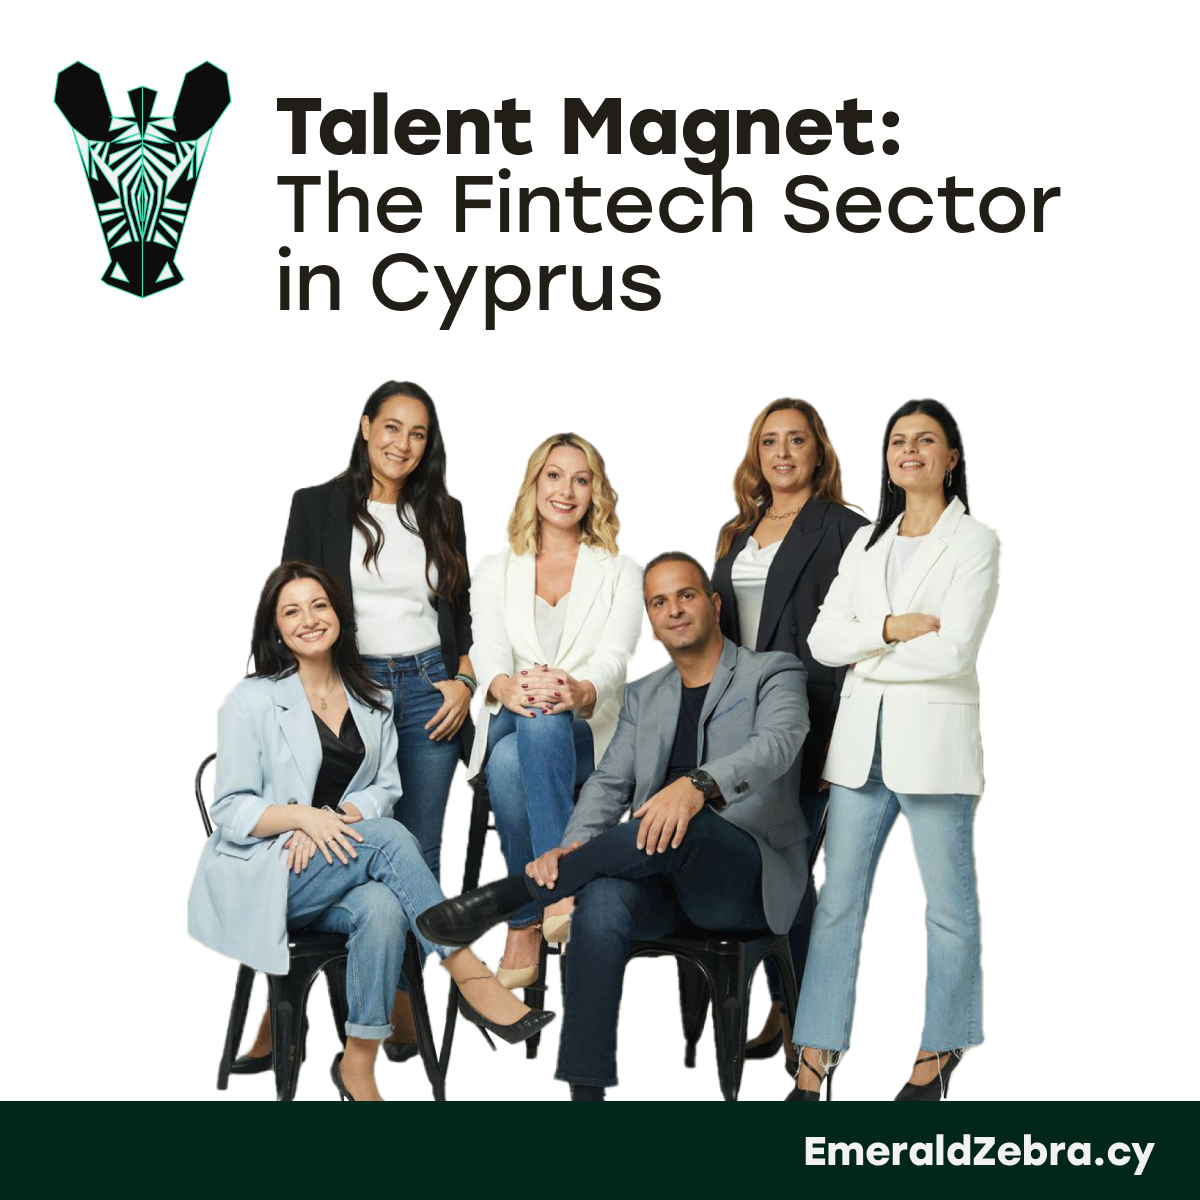 Talent Magnet: The Fintech Sector in Cyprus